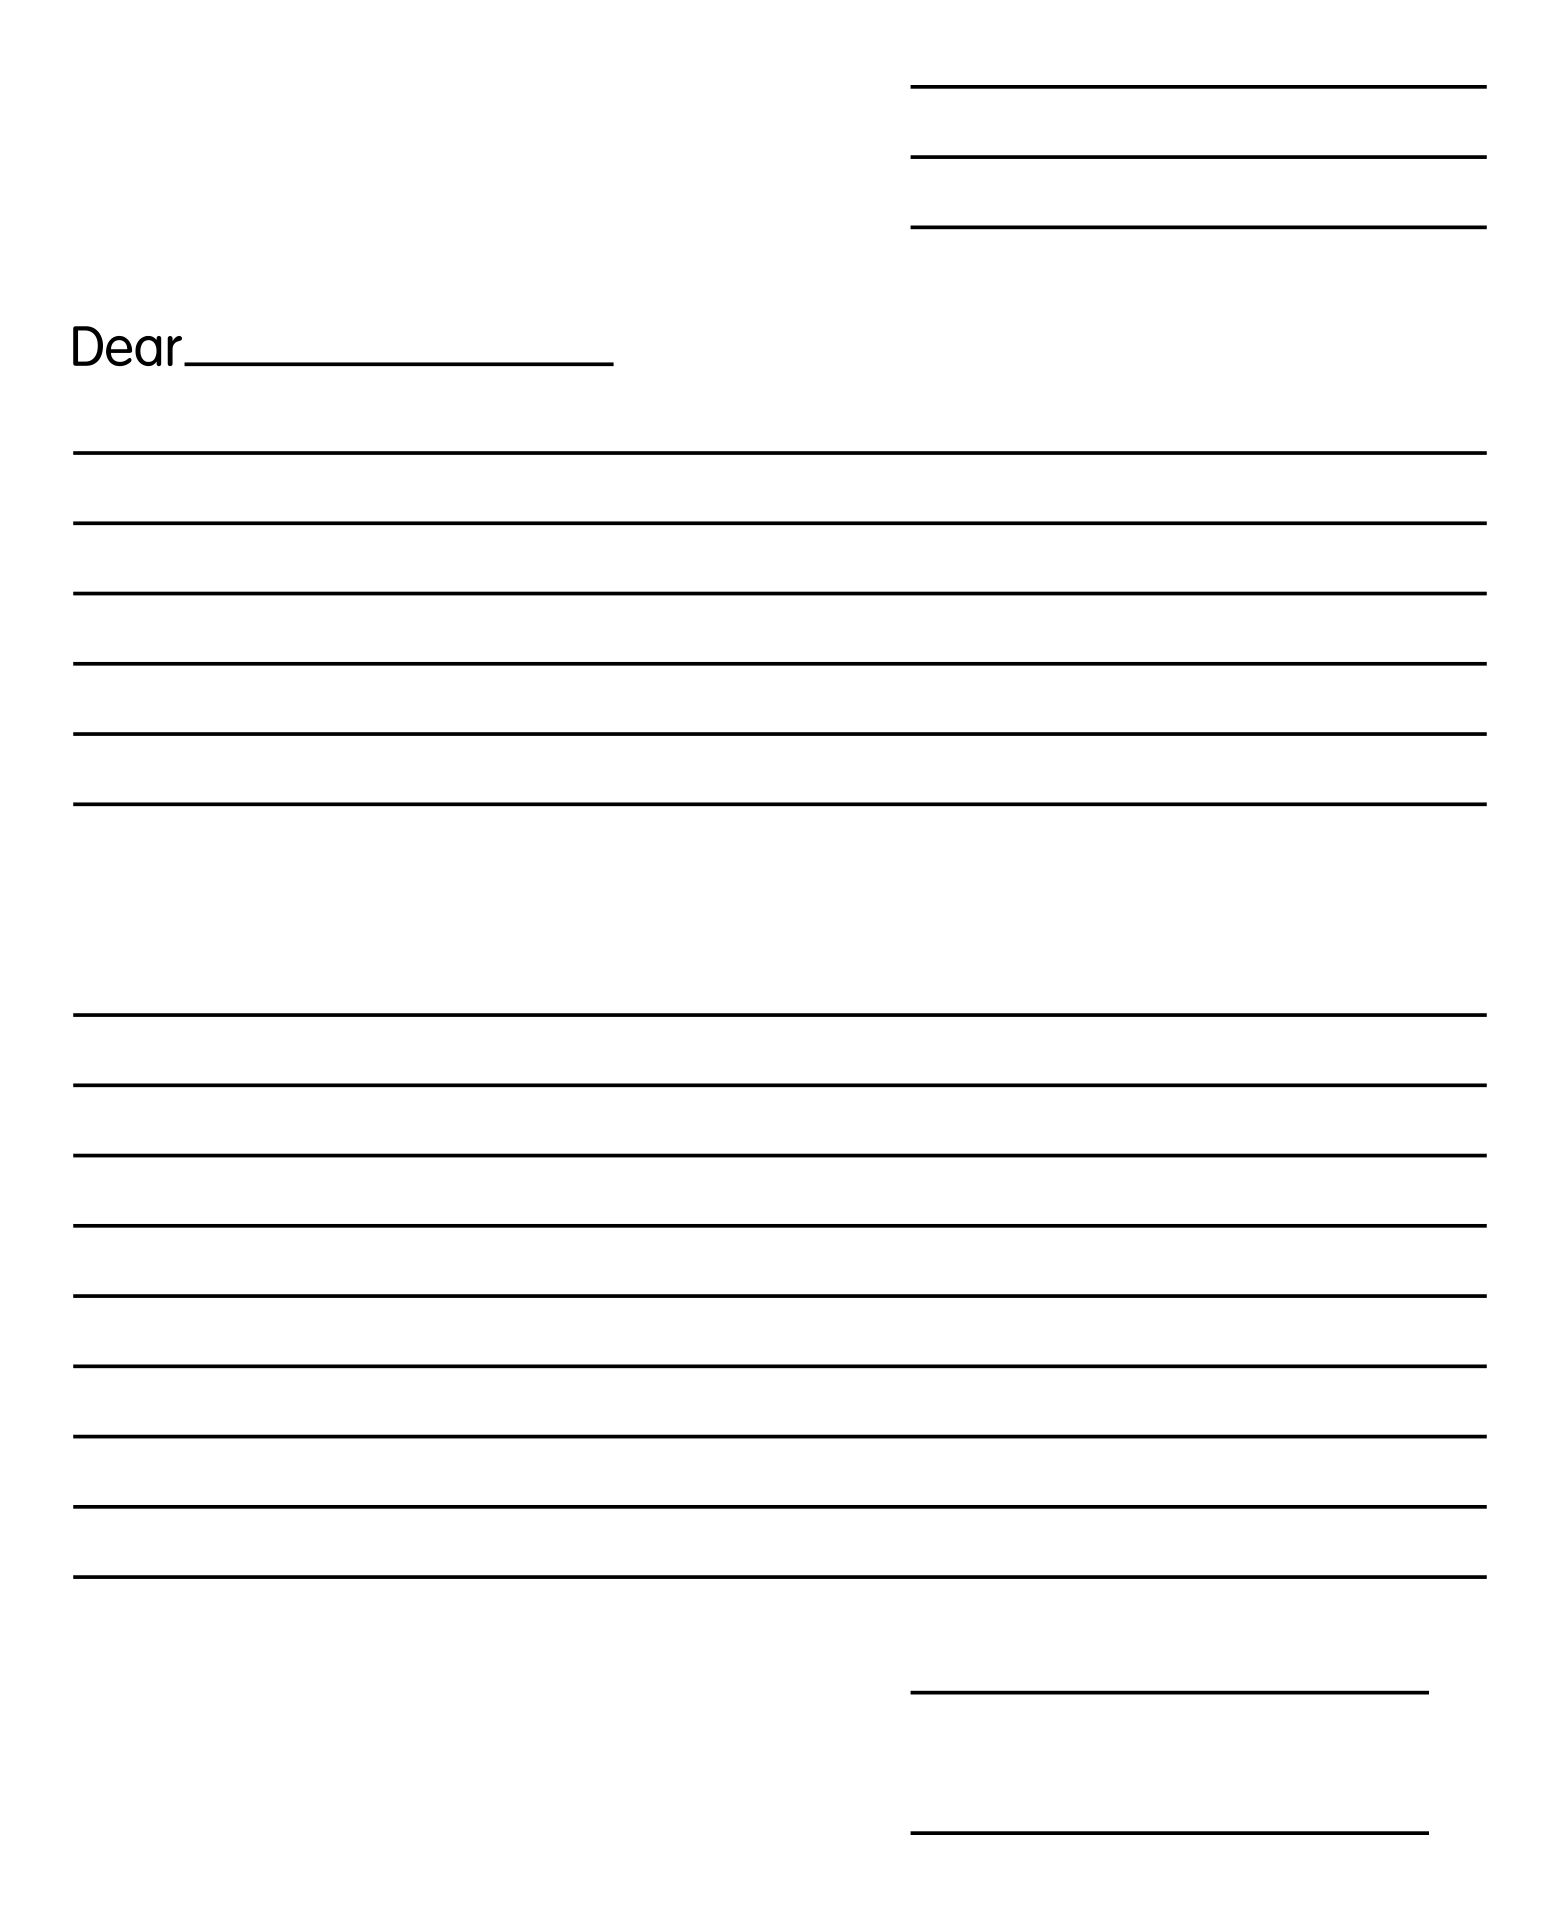 Free Printable Template For A Friendly Letter